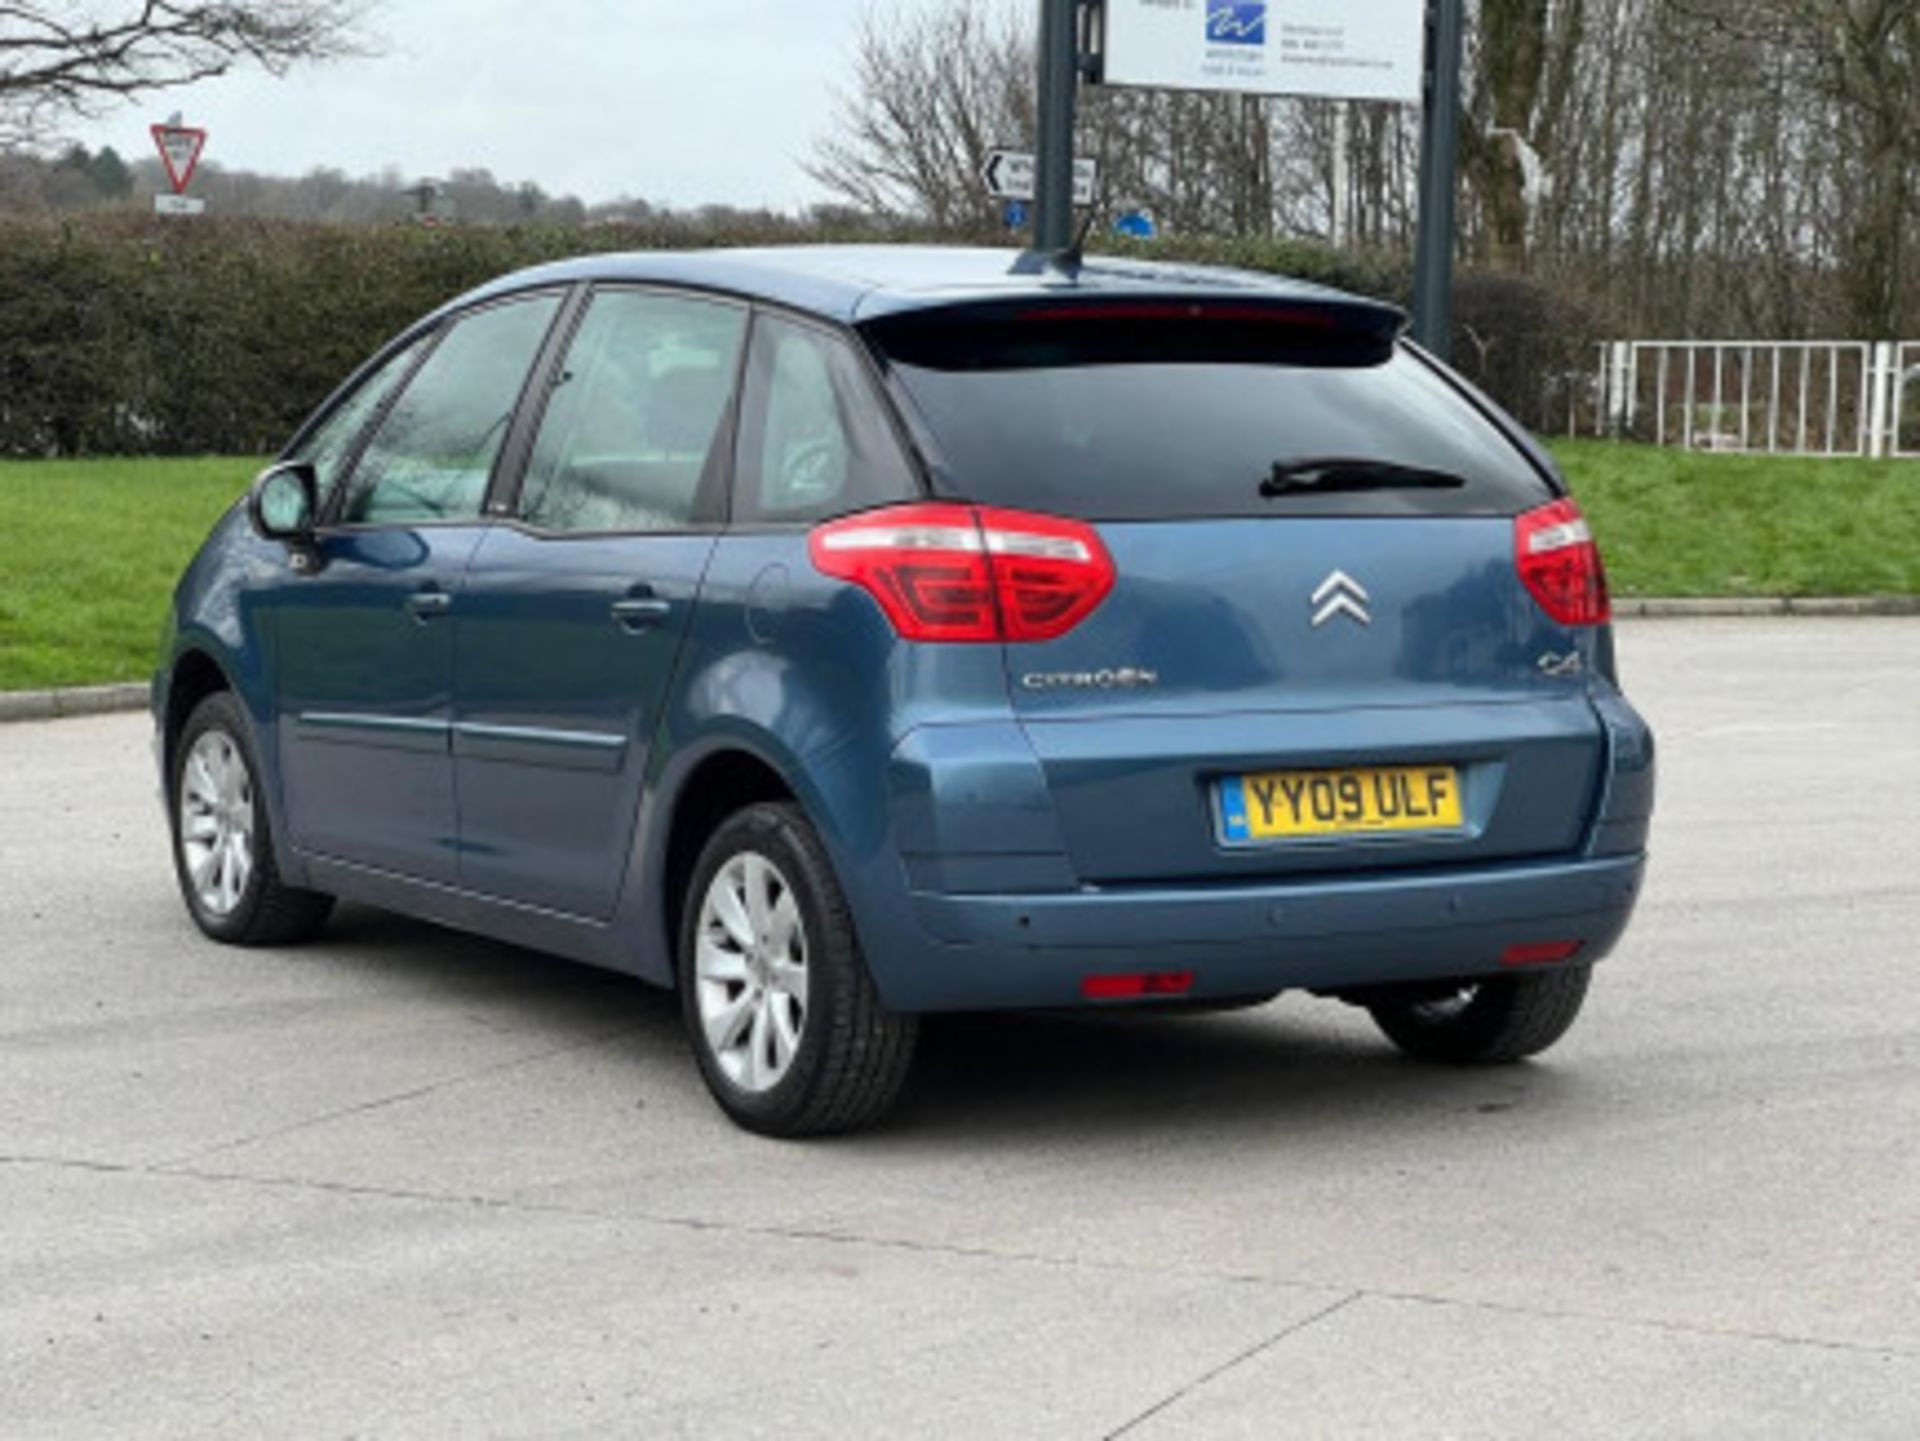 2009 CITROEN C4 PICASSO 1.6 HDI VTR+ EGS6 5DR >>--NO VAT ON HAMMER--<< - Image 50 of 123